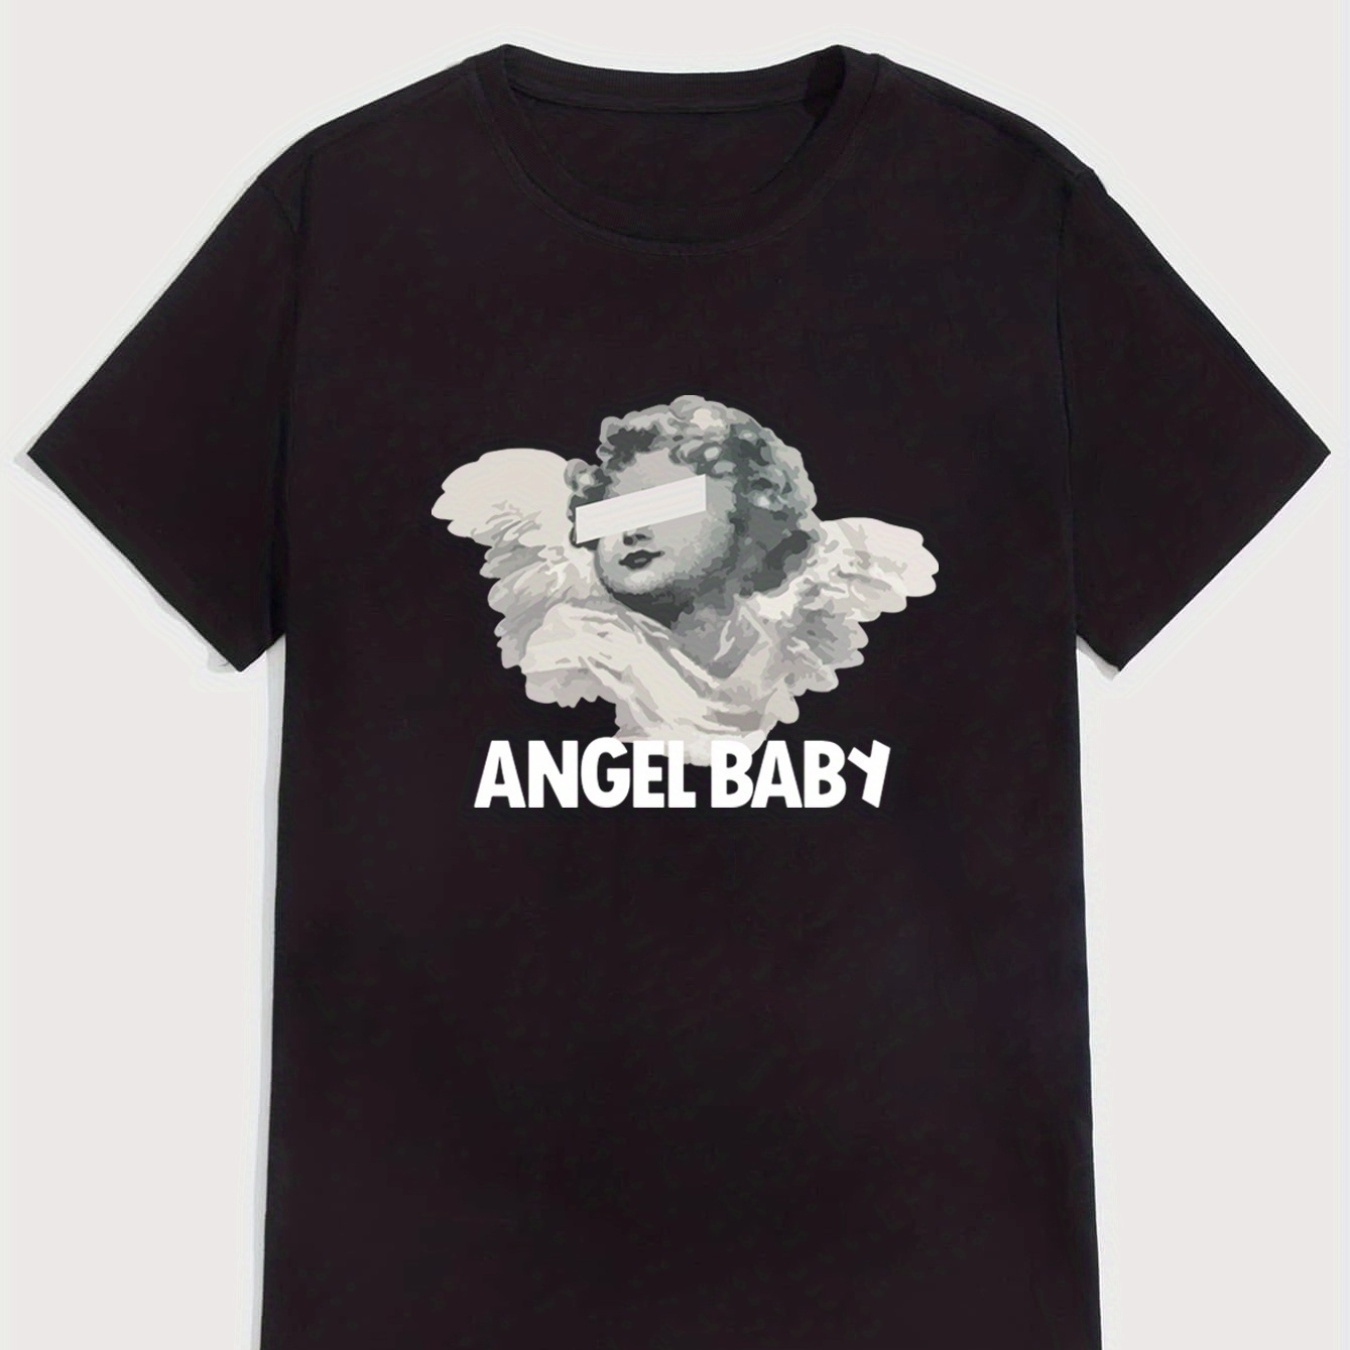 

'angel Baby' Round Neck T-shirts, Causal Graphic Tees, Short Sleeves Slim Fit Tops, Men's Summer Clothing